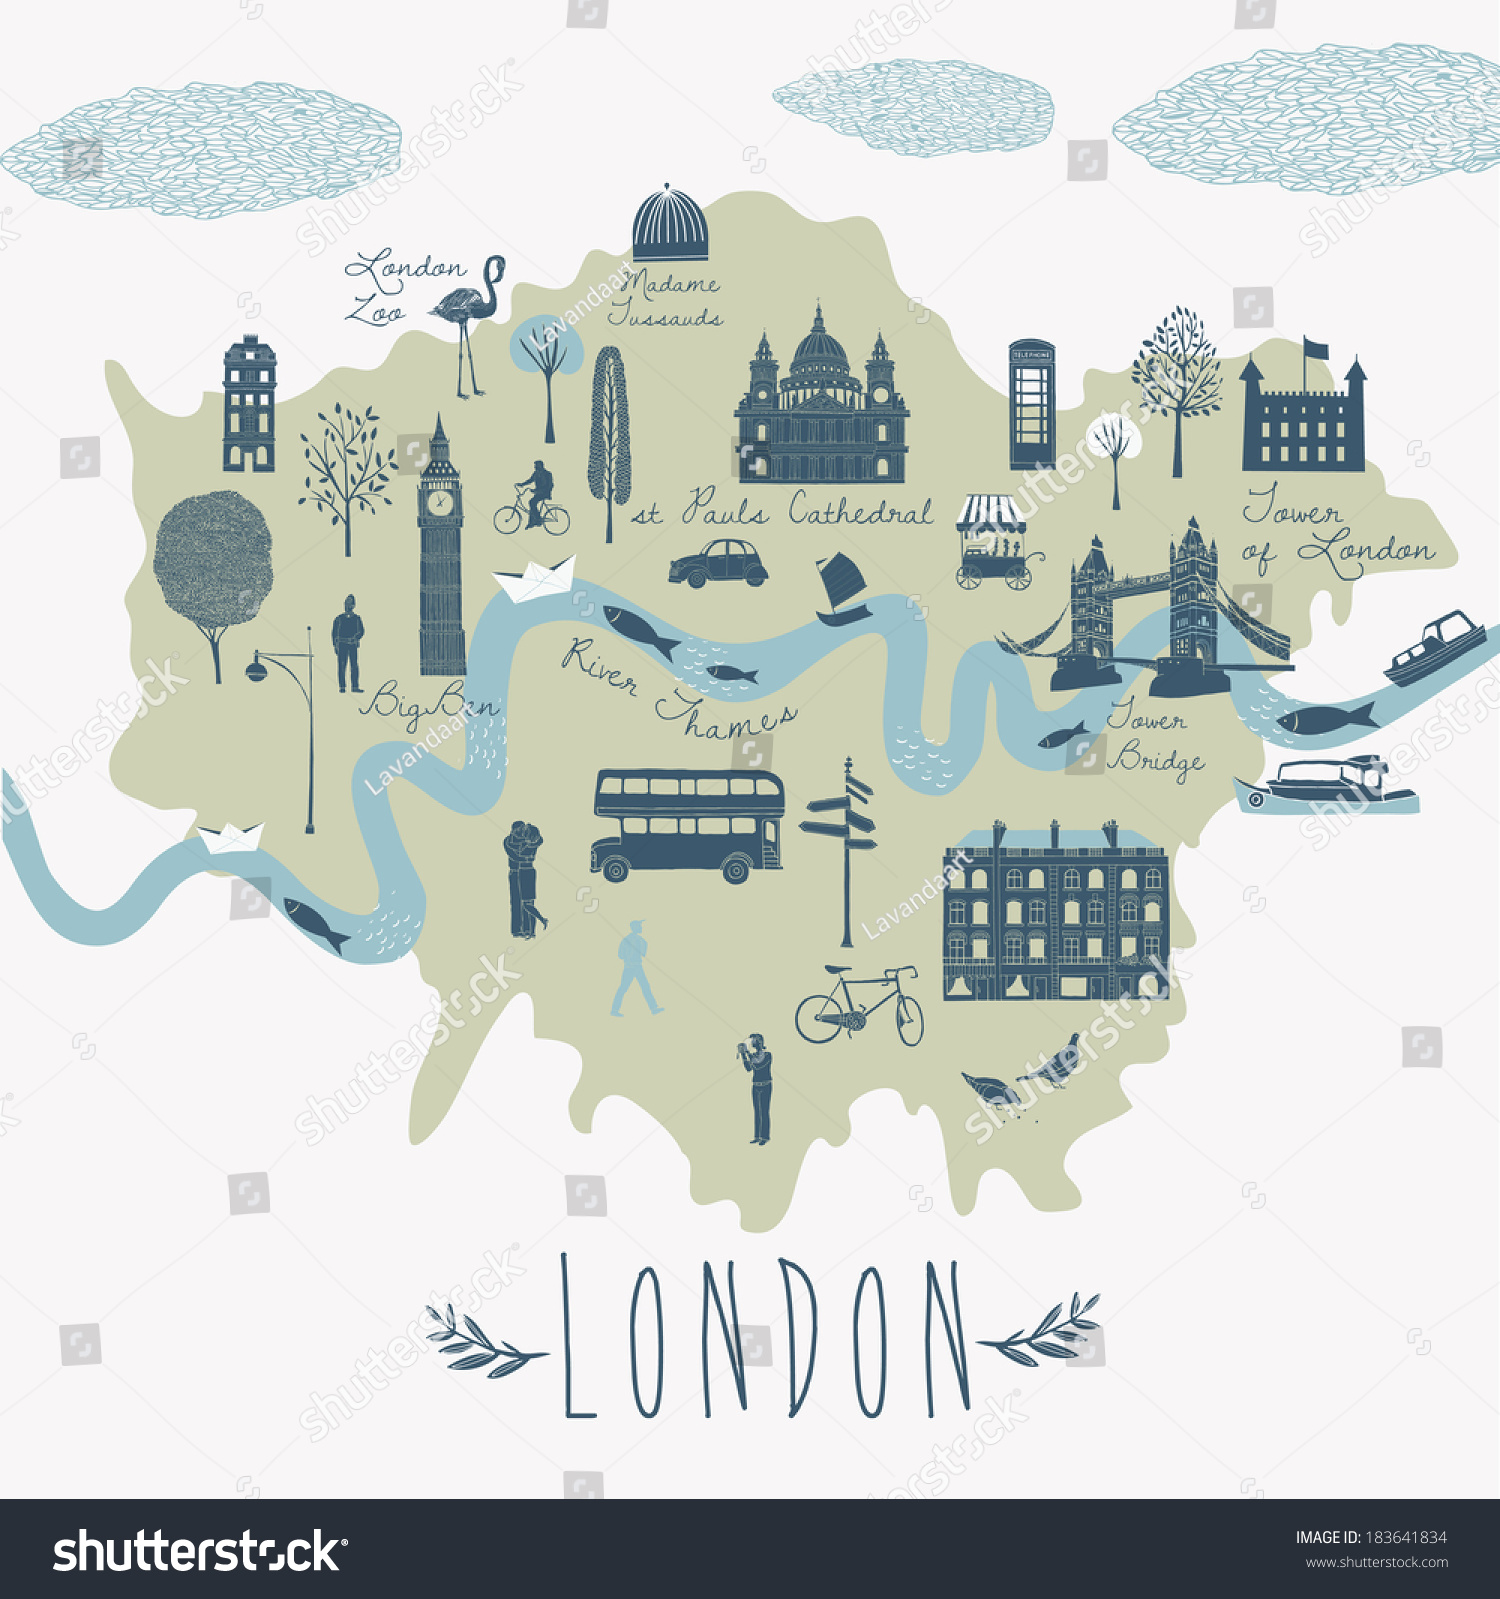 Map of London Attractions #183641834